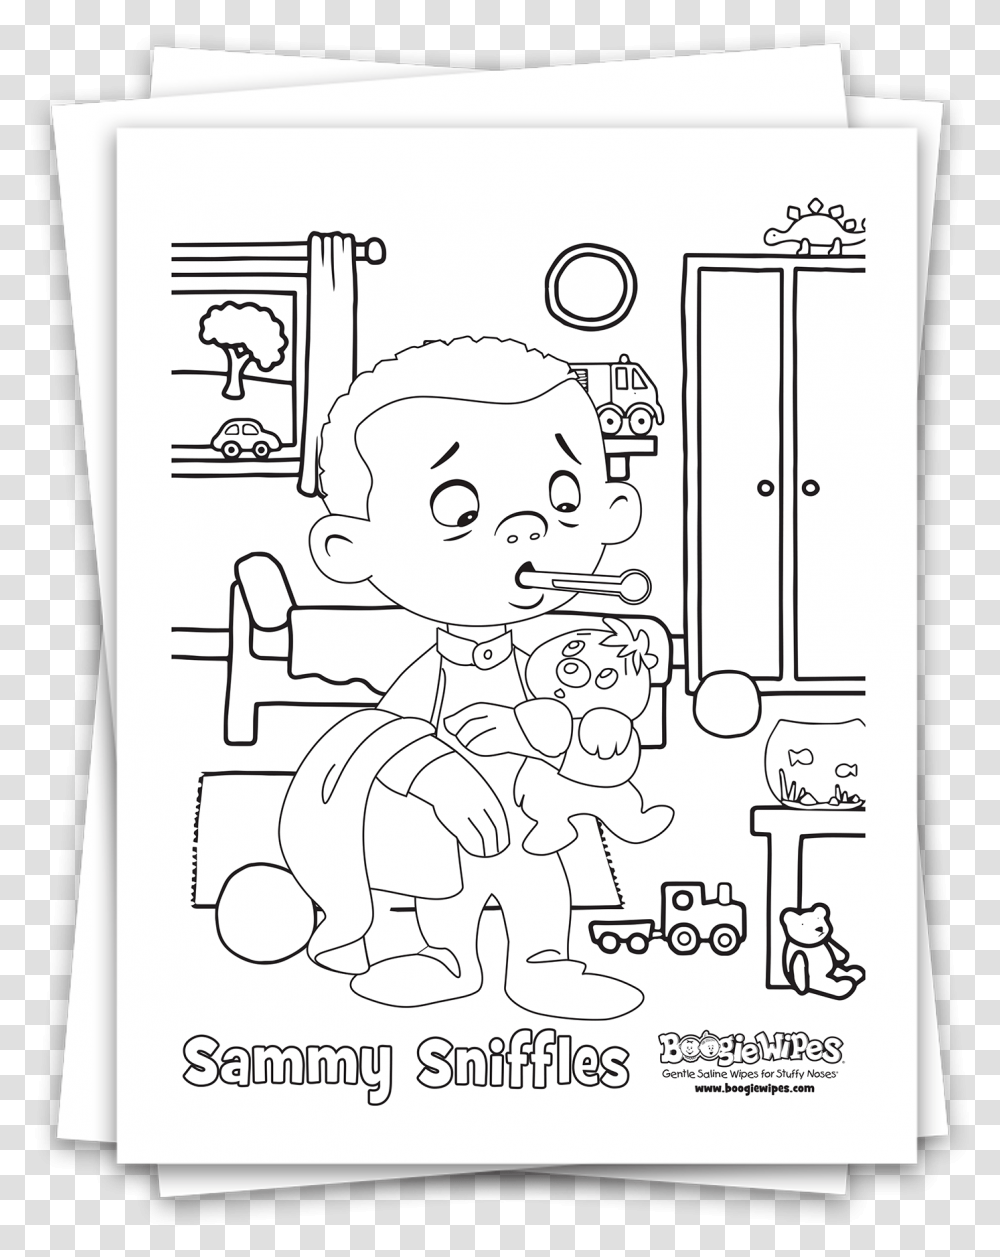 Sammy Sniffles Boogie Wipes Booger Coloring Pages, Comics, Book, Pillow Transparent Png